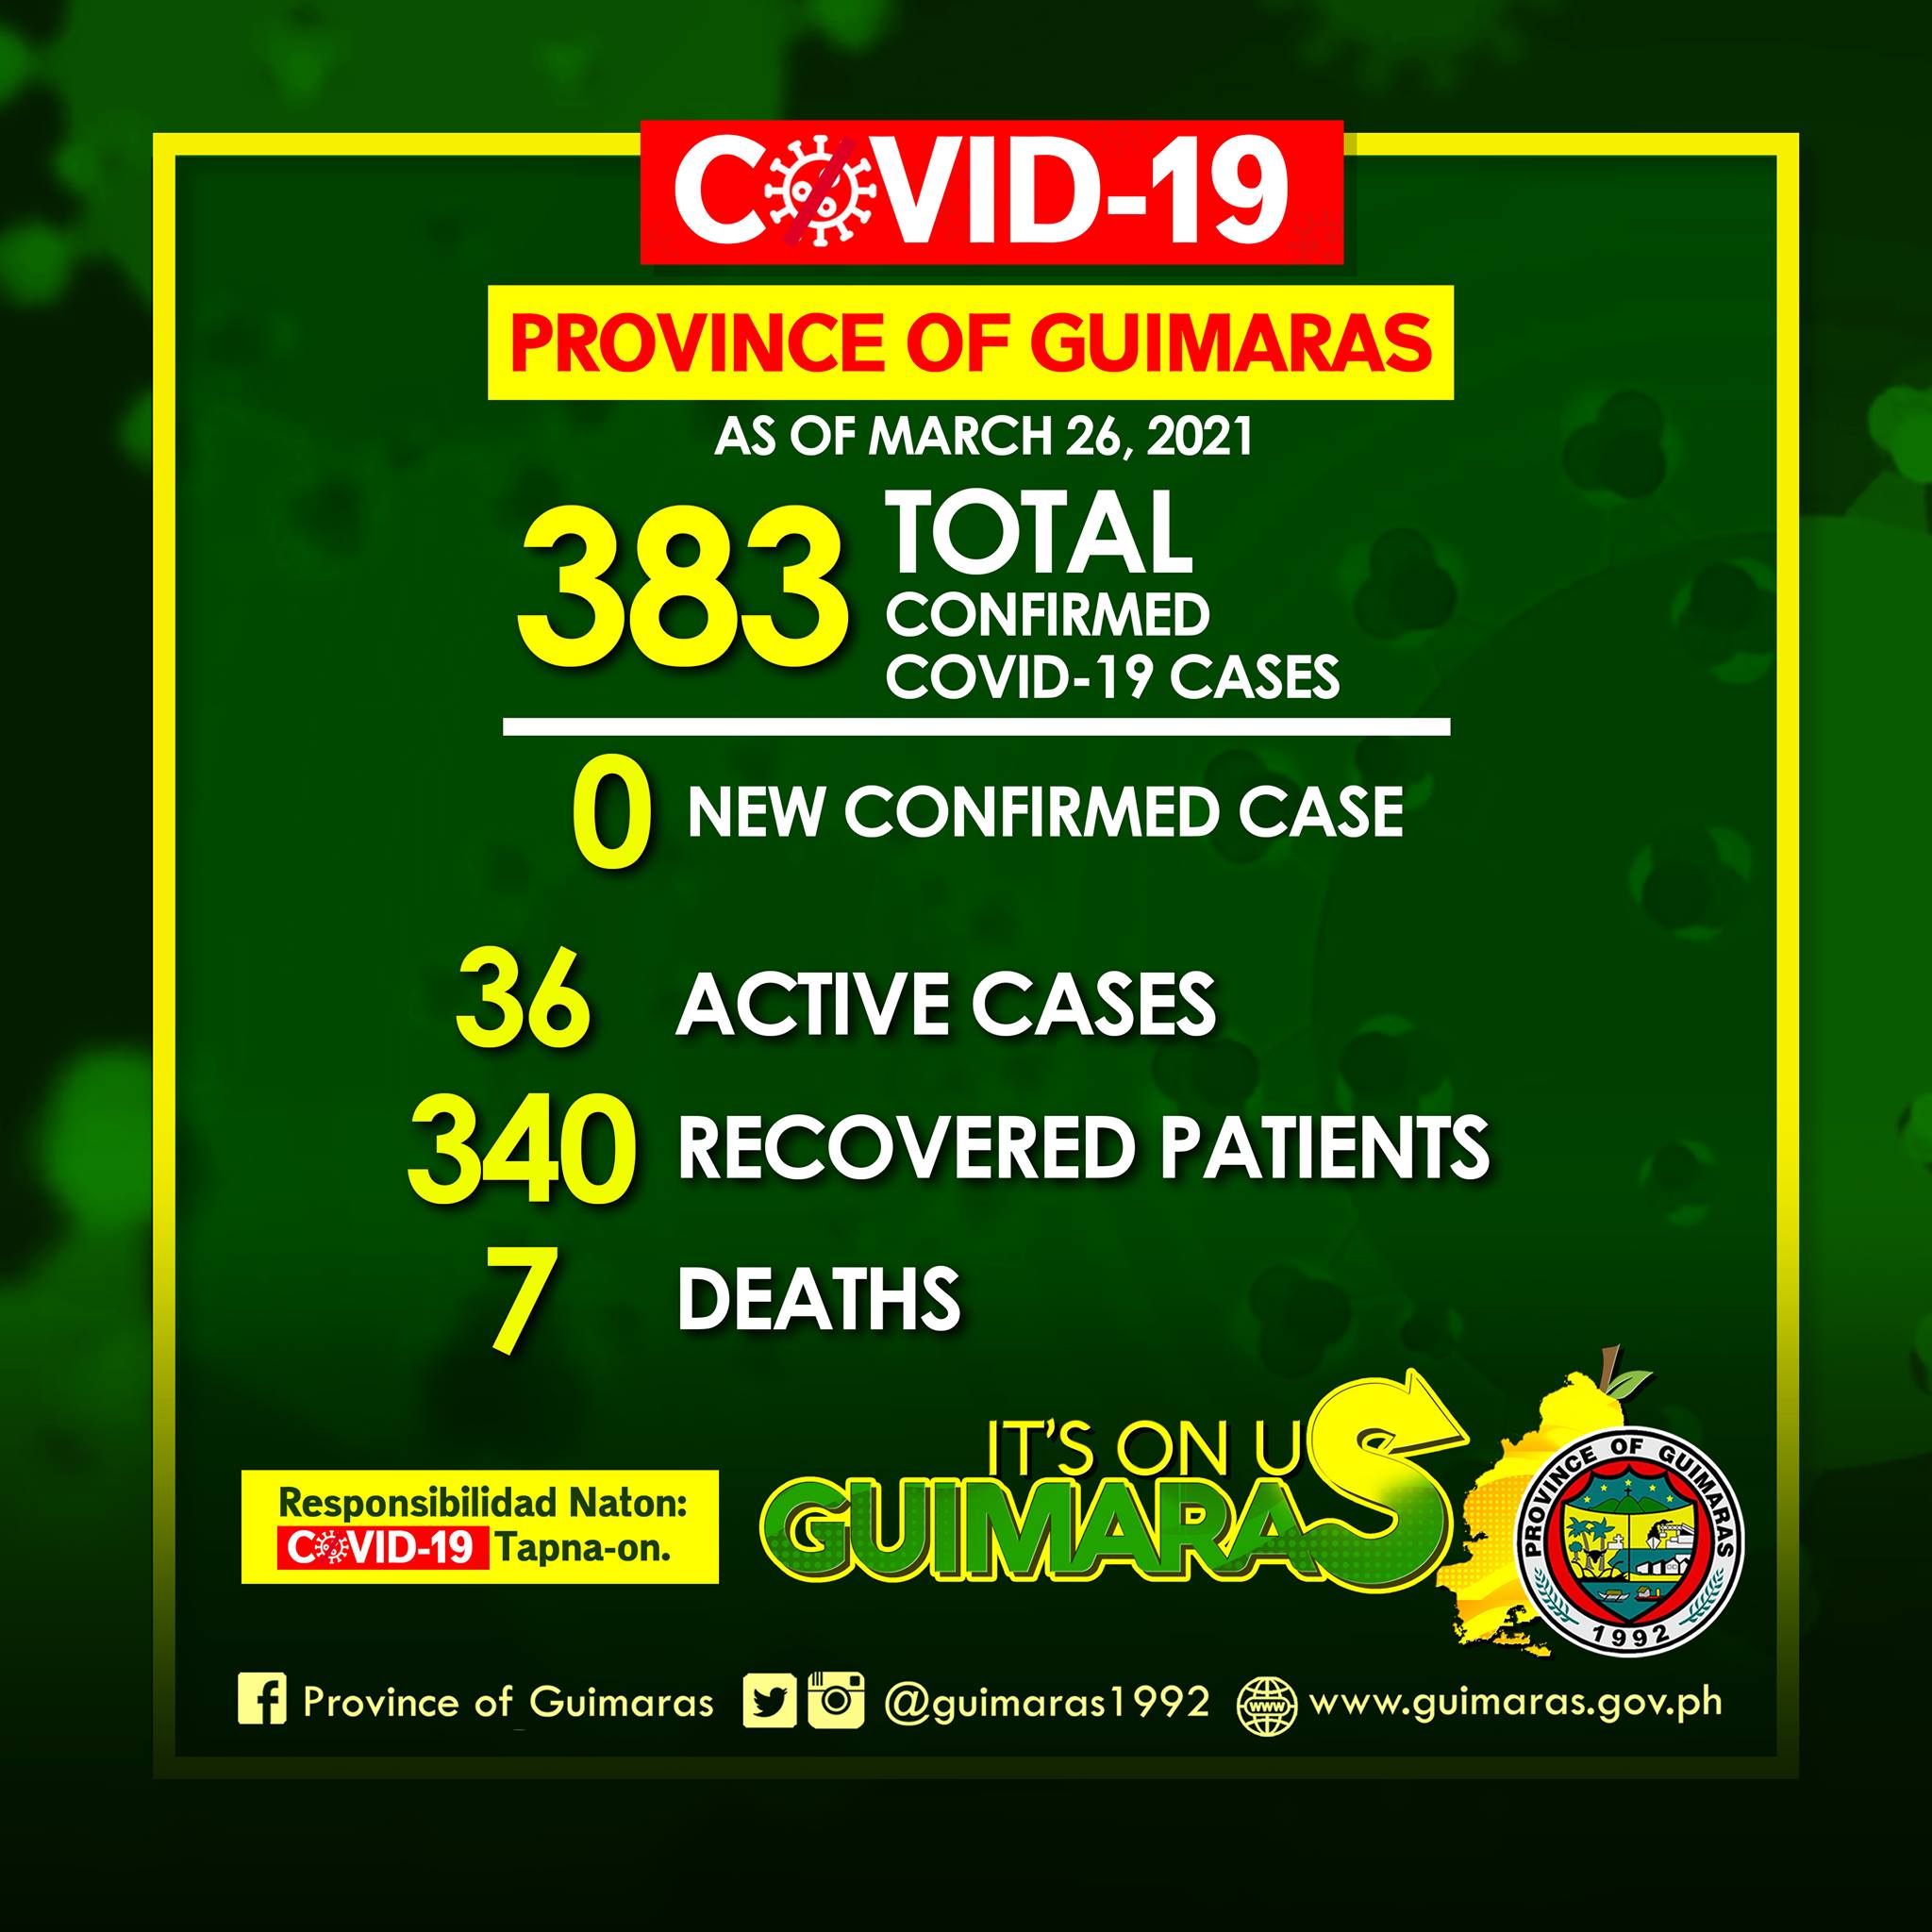 Guimaras COVID-19 Update as of March 26, 2021